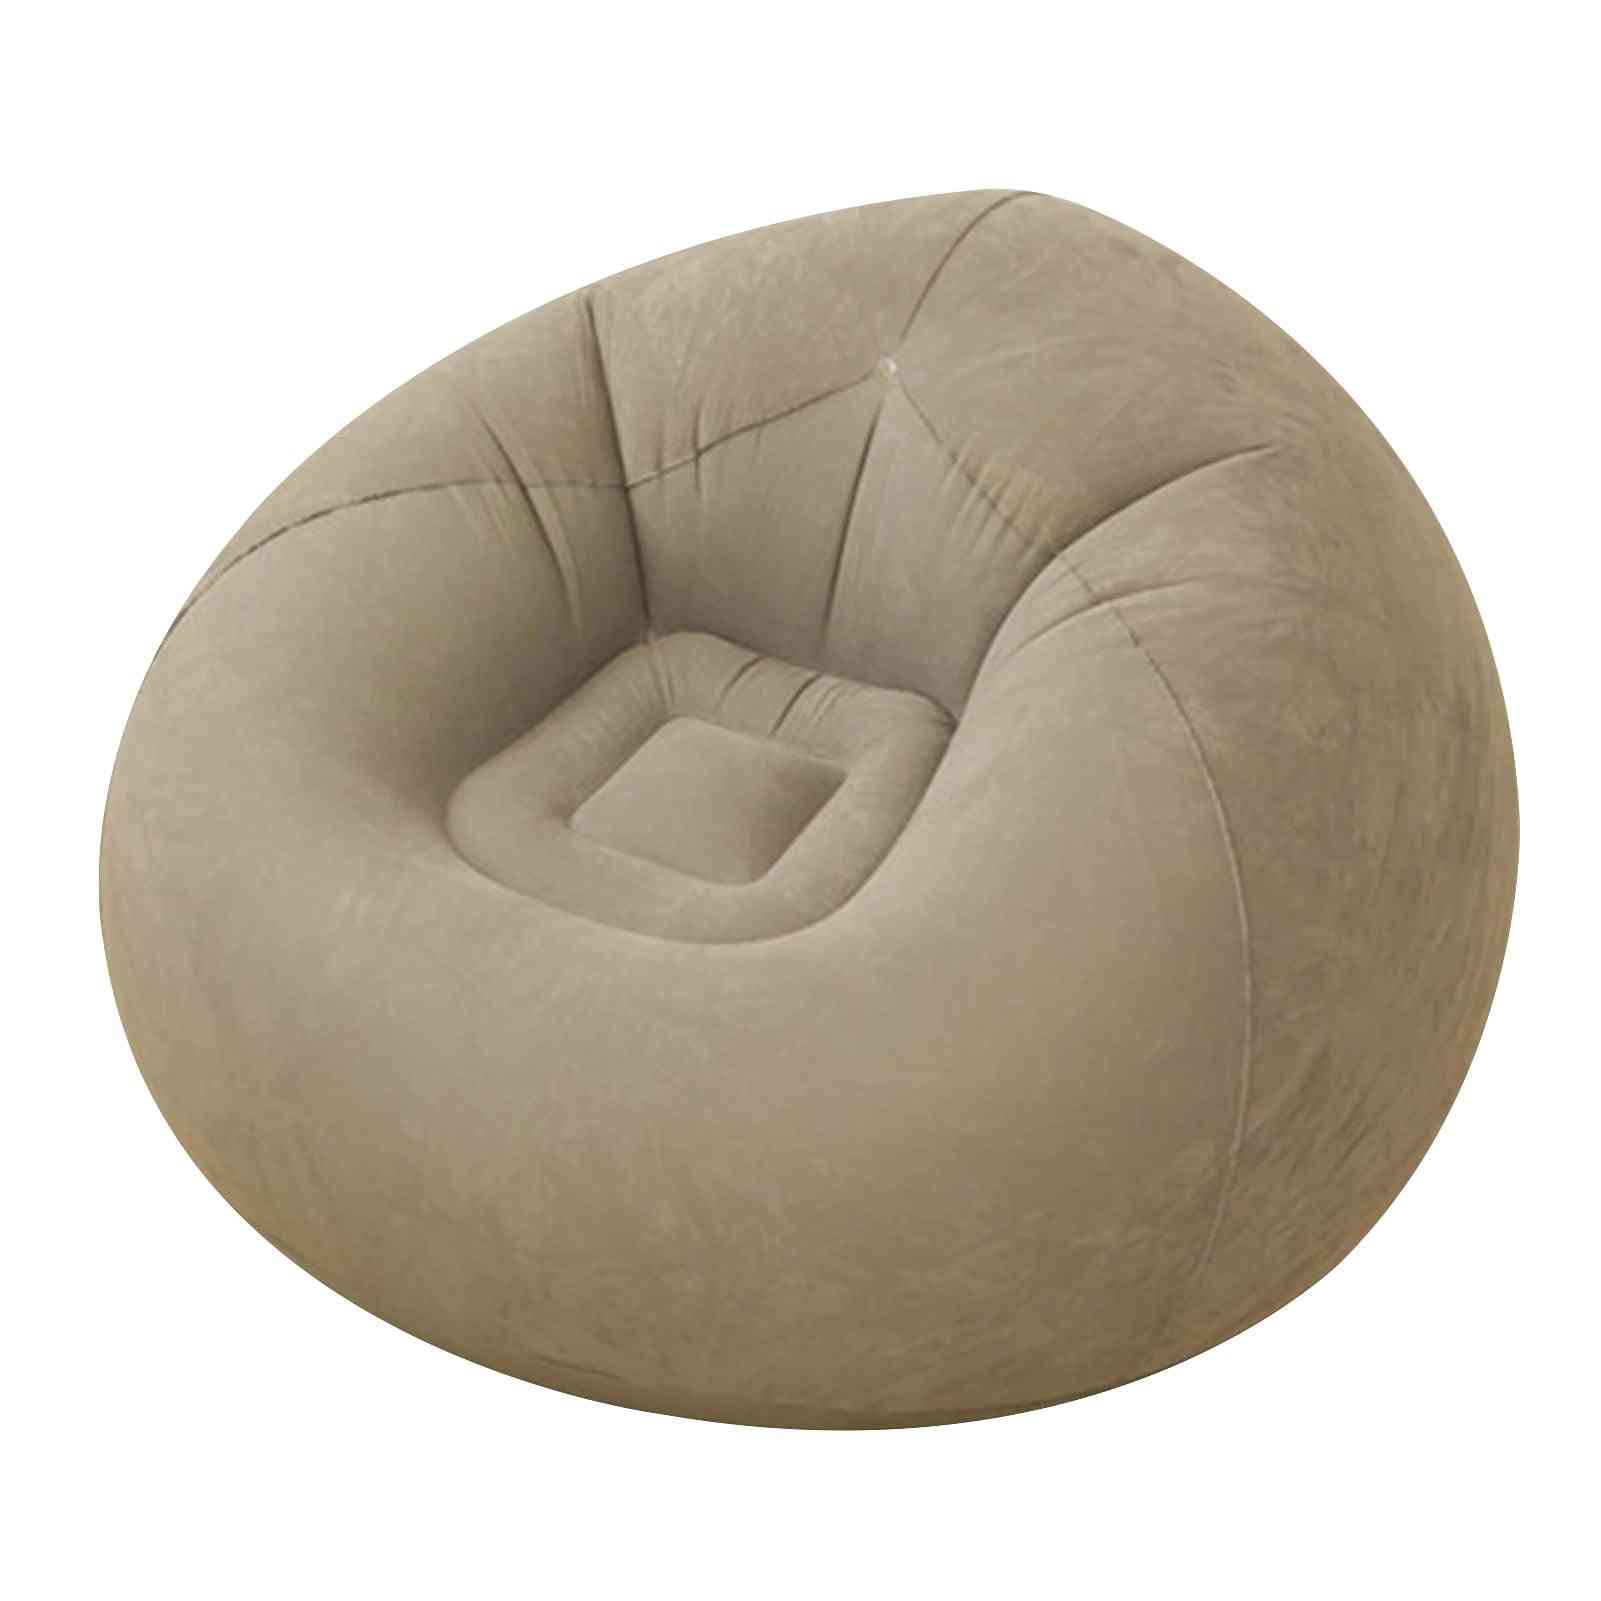 Recliner Washable Comfortable Bean Bag Chair, Inflatable Lazy Sofa